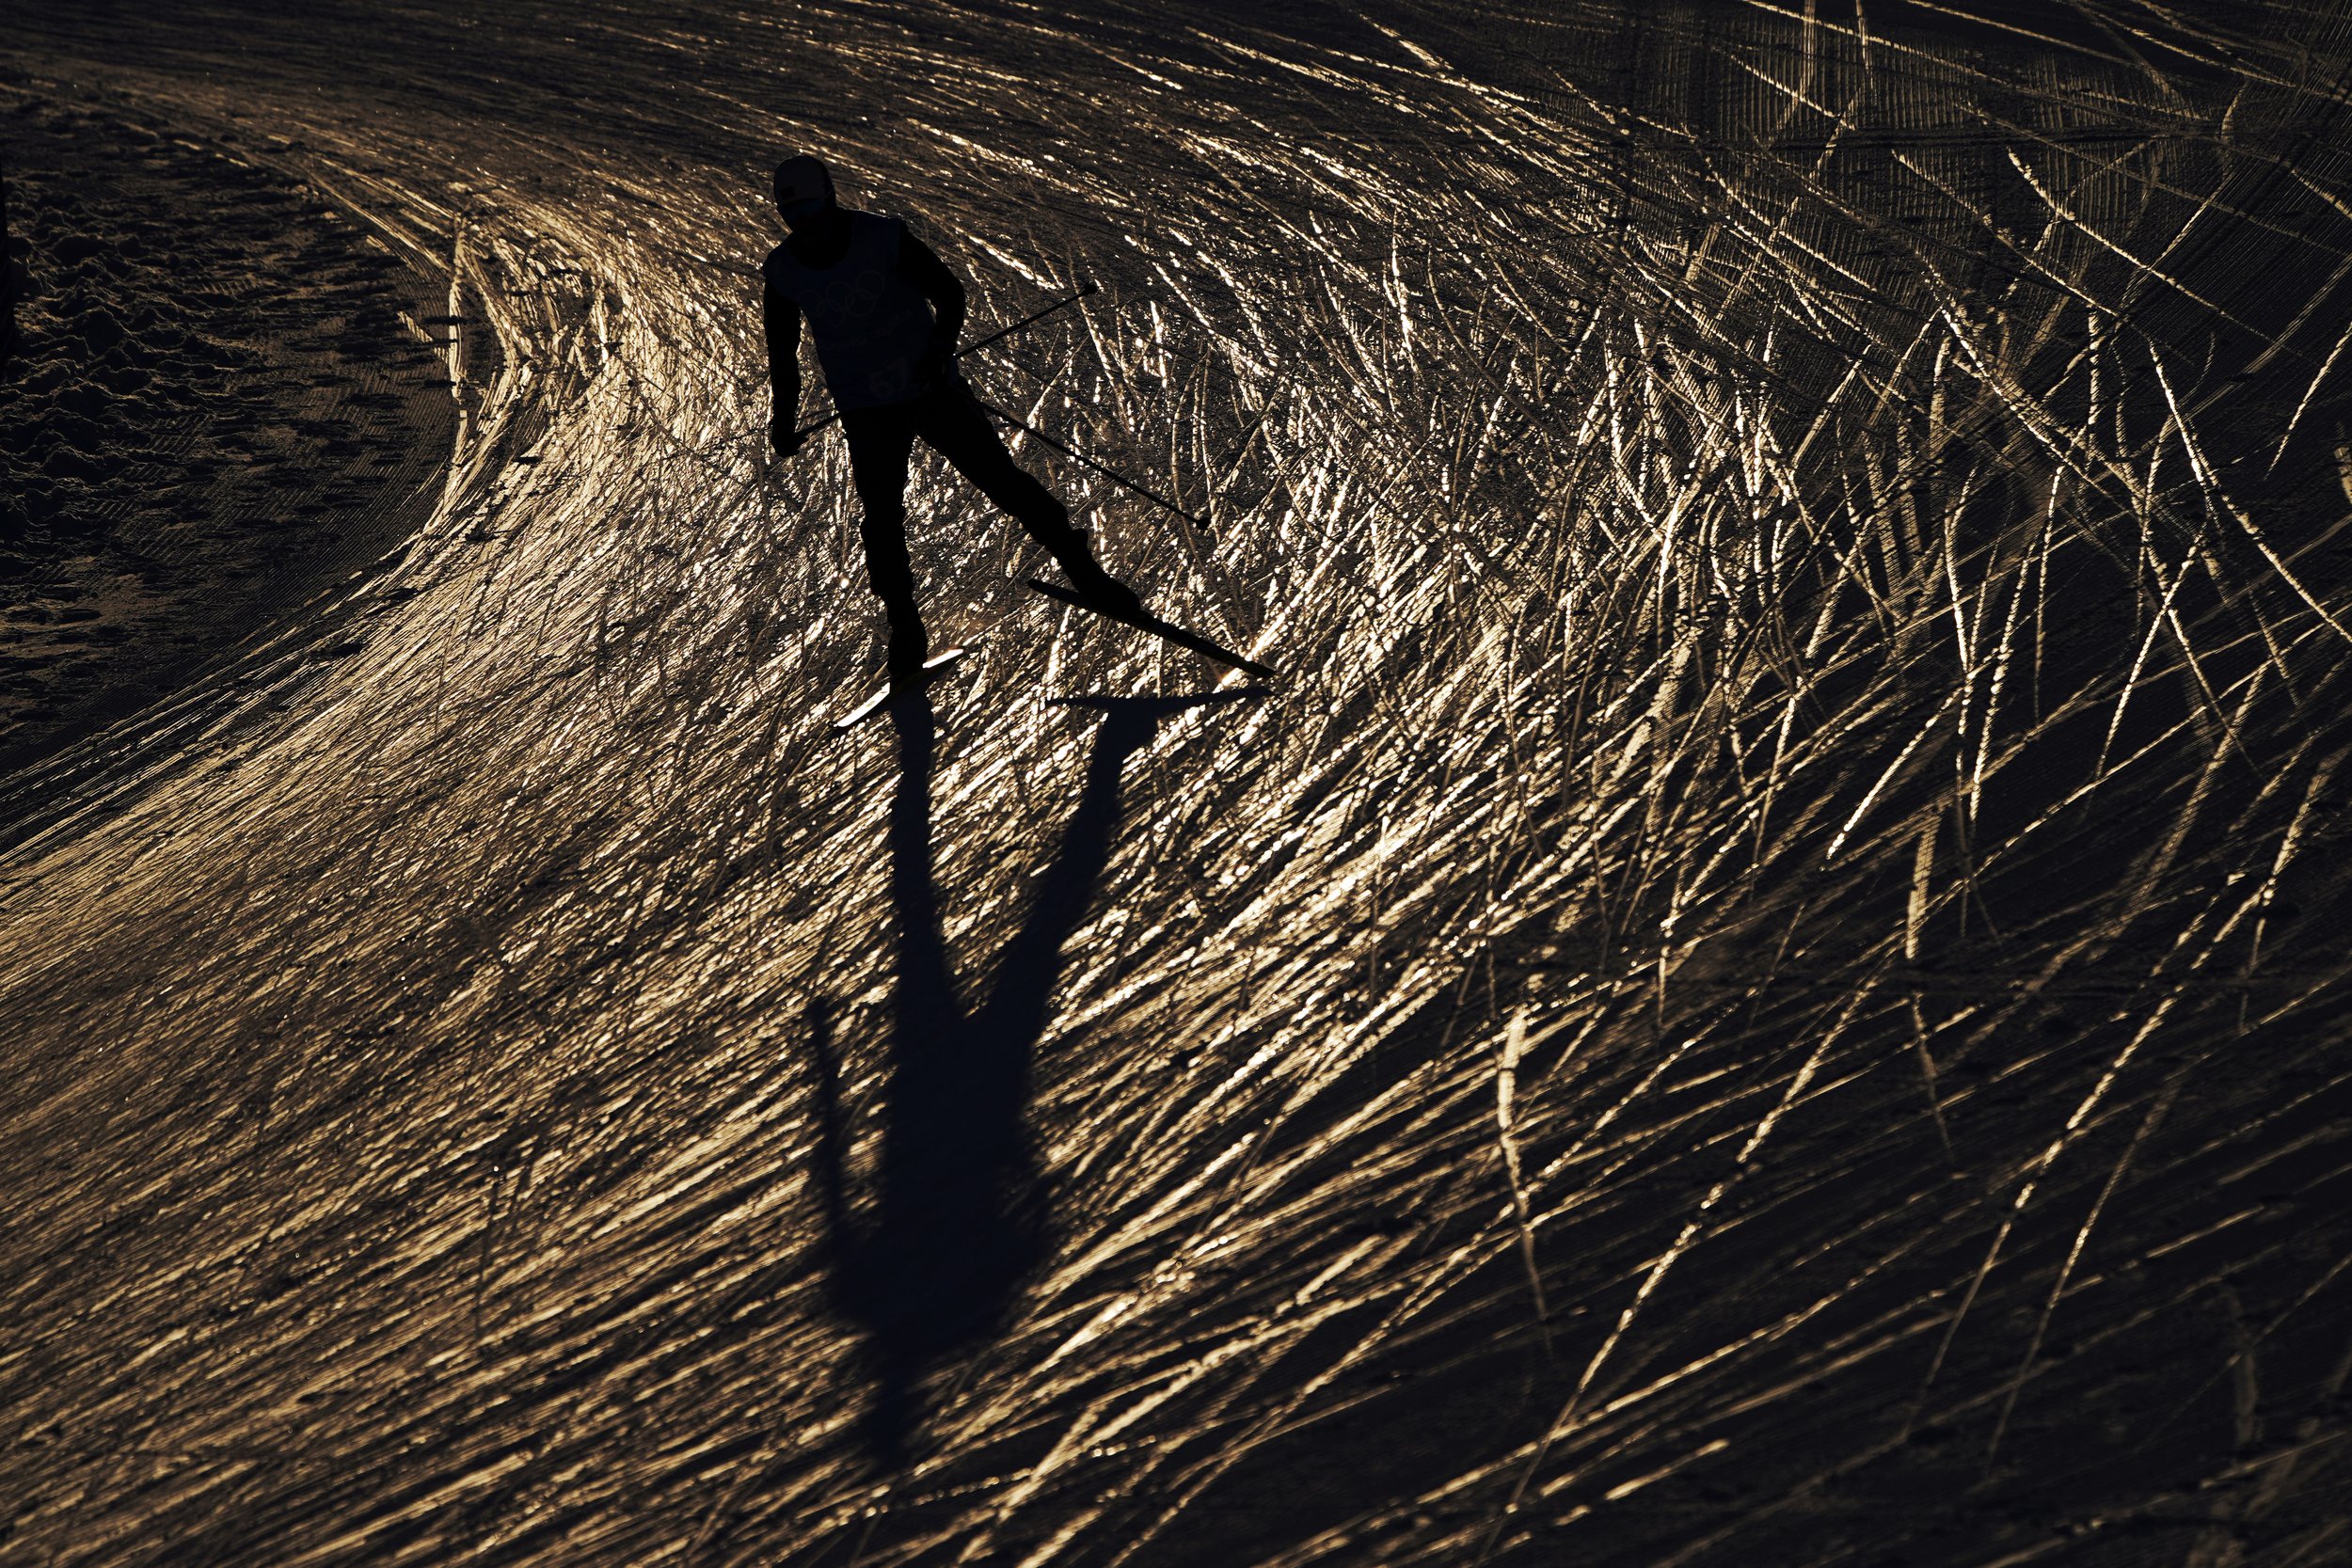  A skier trains during a cross-country skiing training session at the 2022 Winter Olympics, Monday, Feb. 14, 2022, in Zhangjiakou, China. (AP Photo/John Locher) 